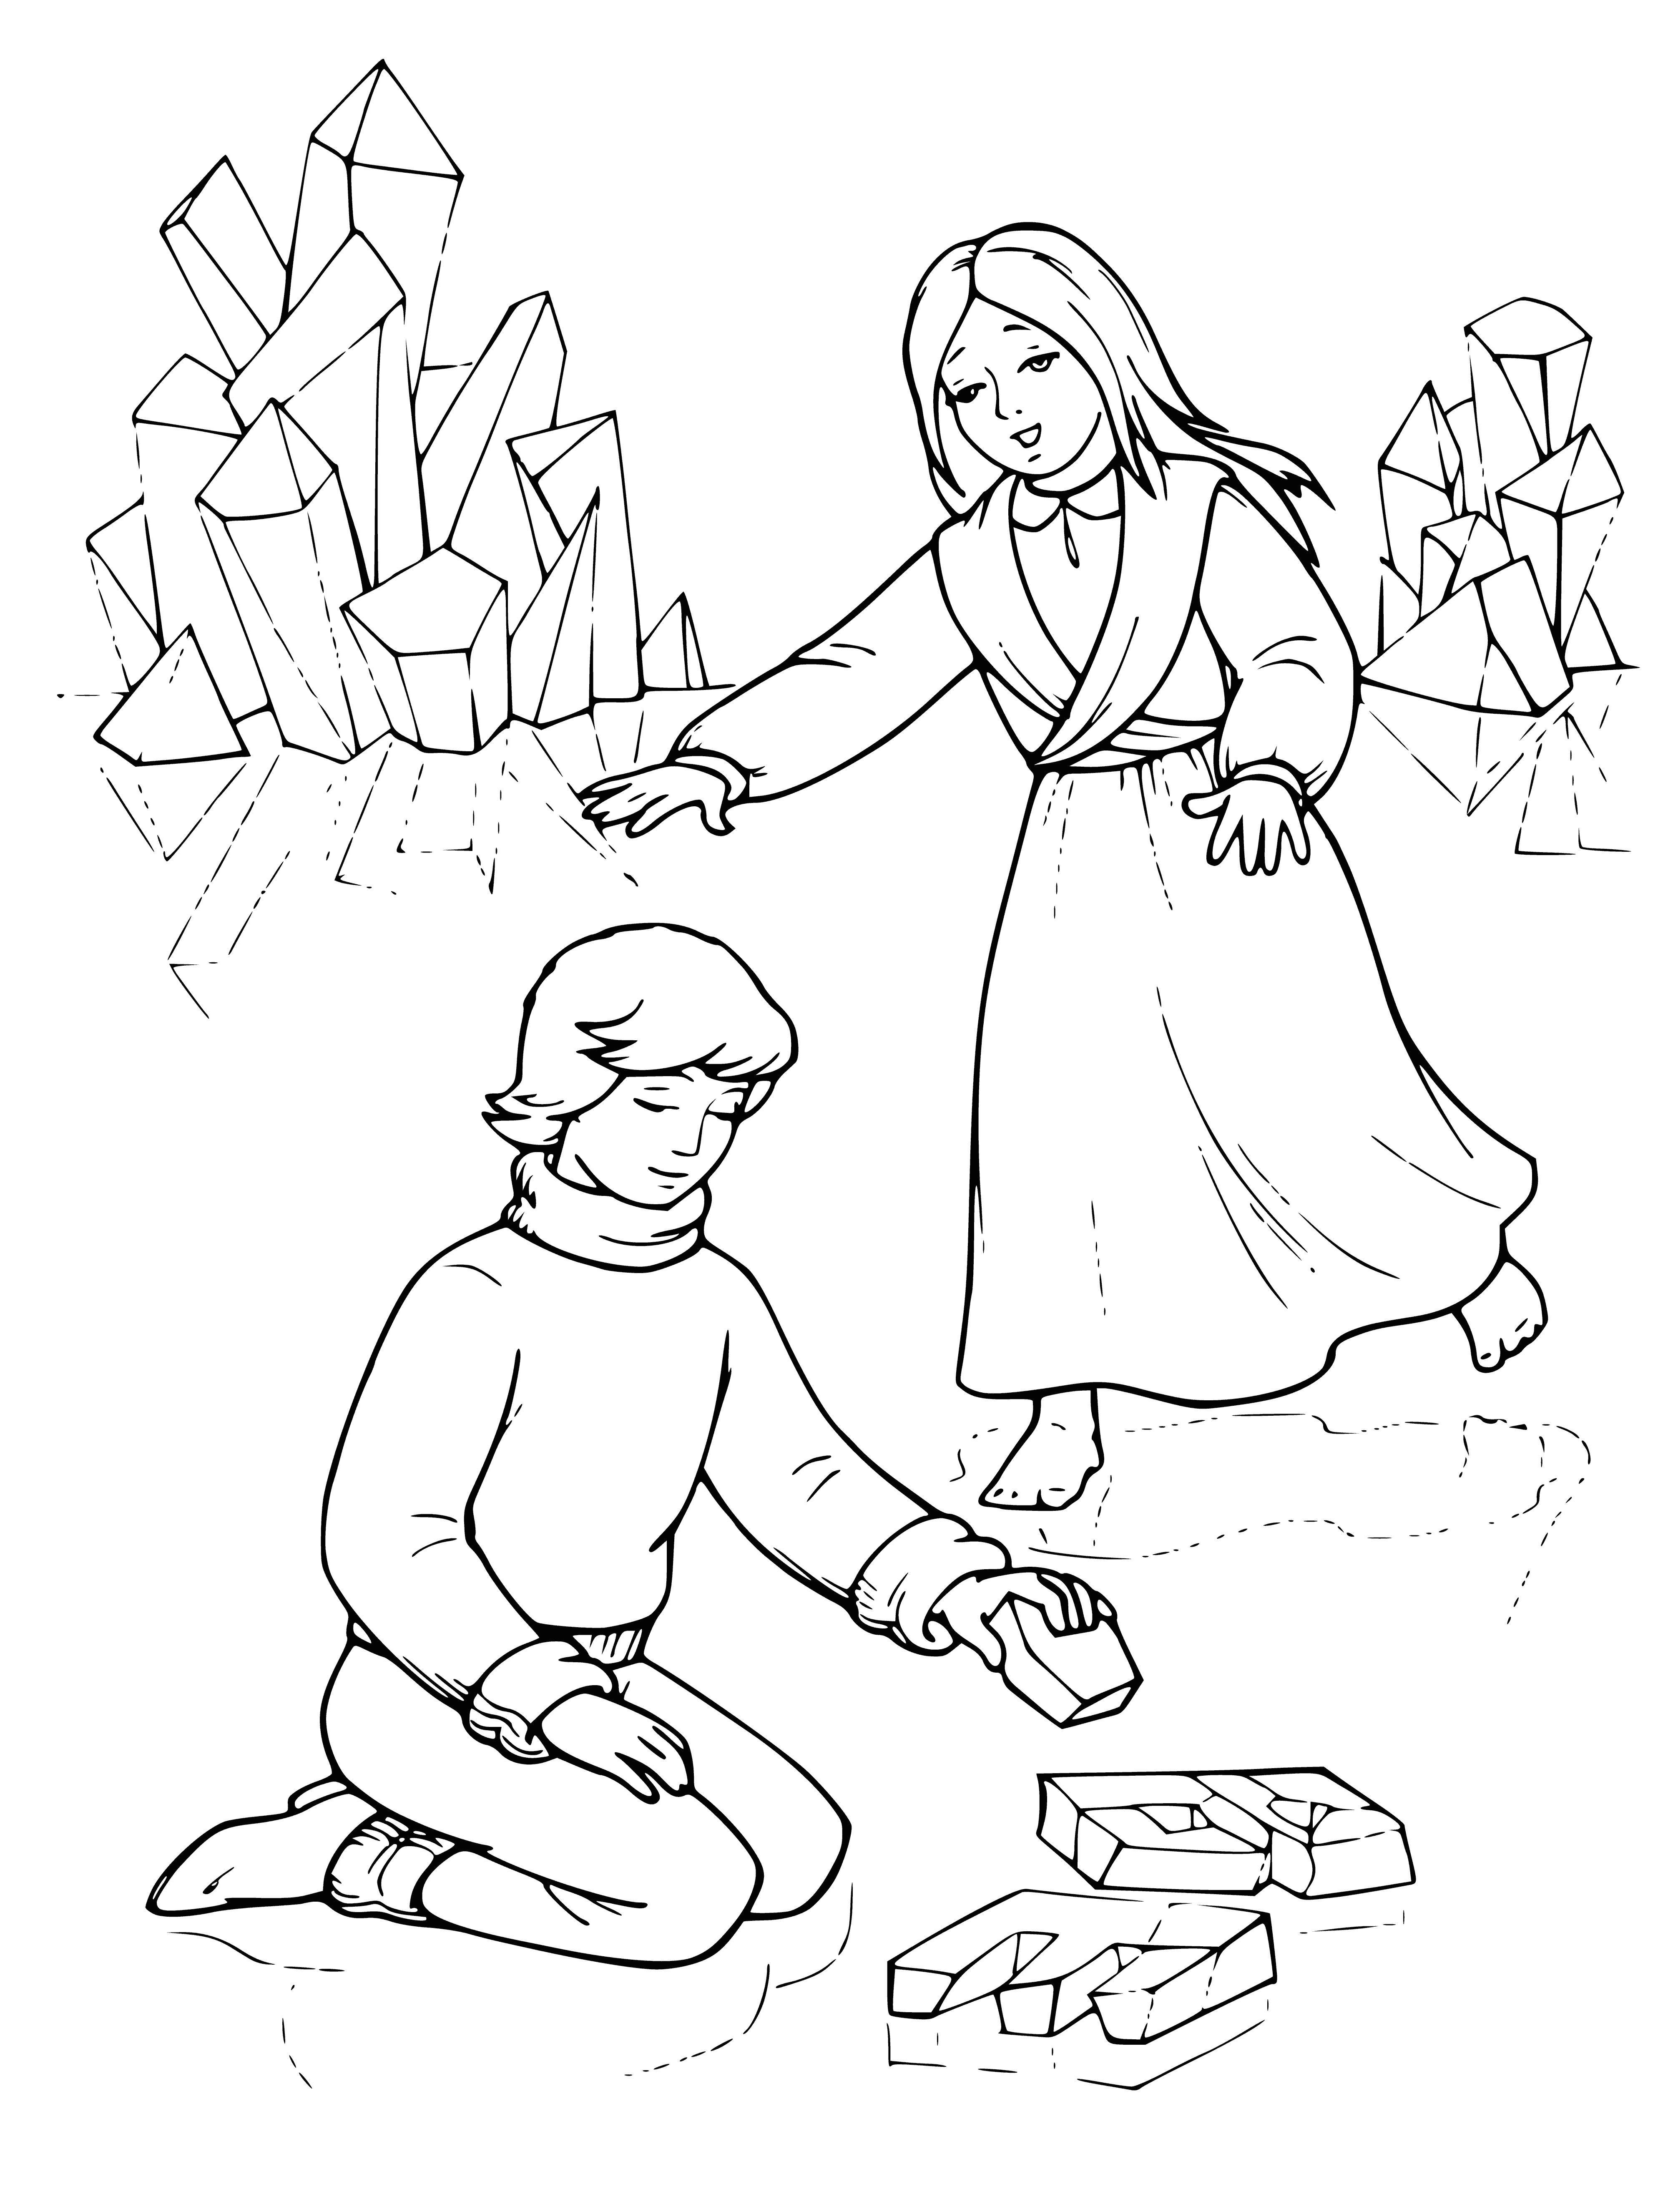 coloring page: Small girl w/ blonde hair & red coat stands in snow with large boy who holds a tulip; she holds a broom.